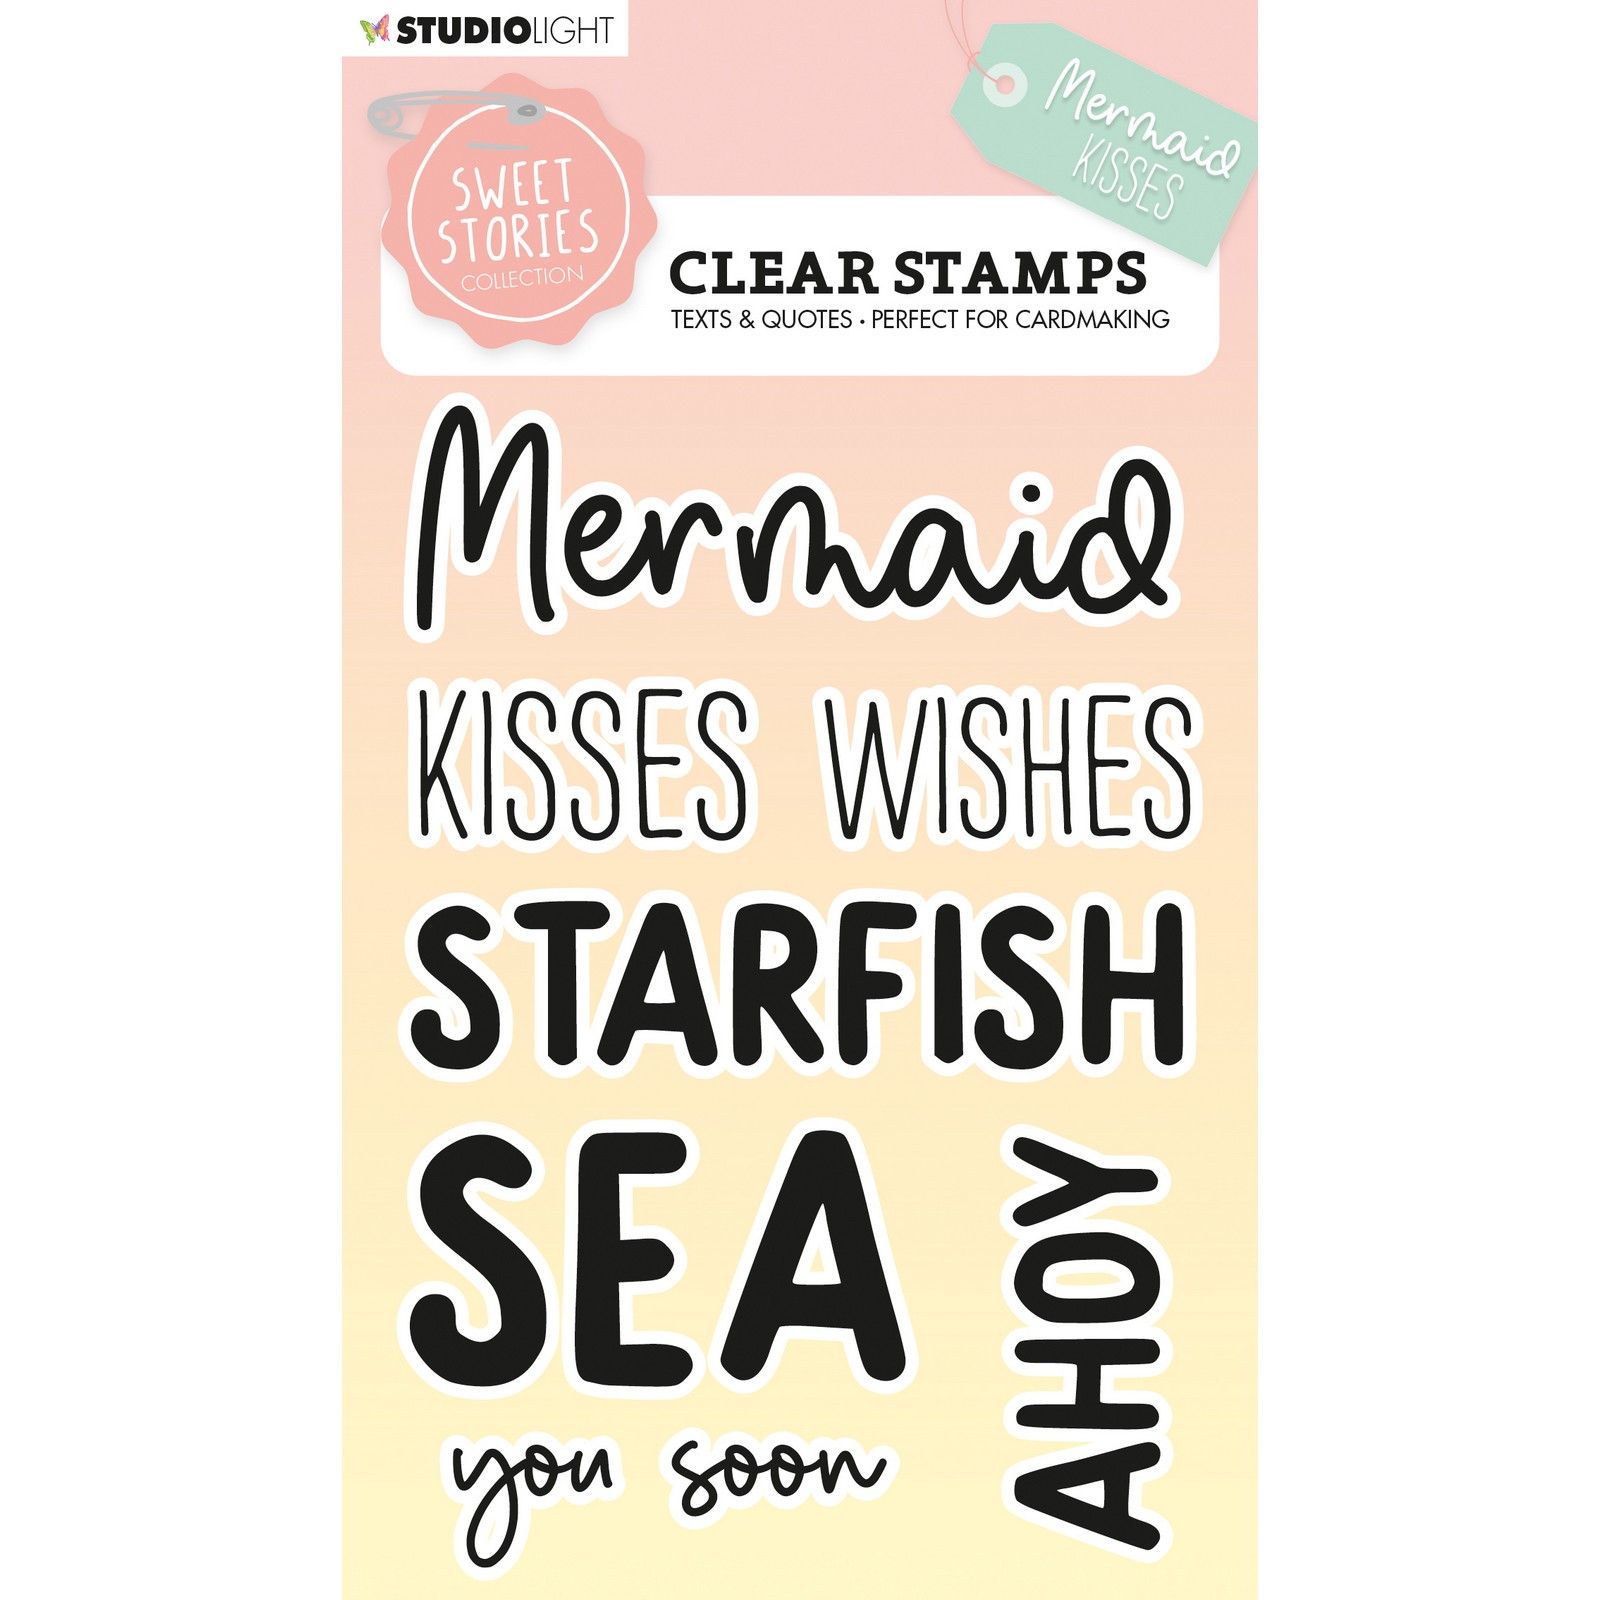 Studio Light • Sweet Stories Clear Stamp Quotes Large Mermaid Kisses